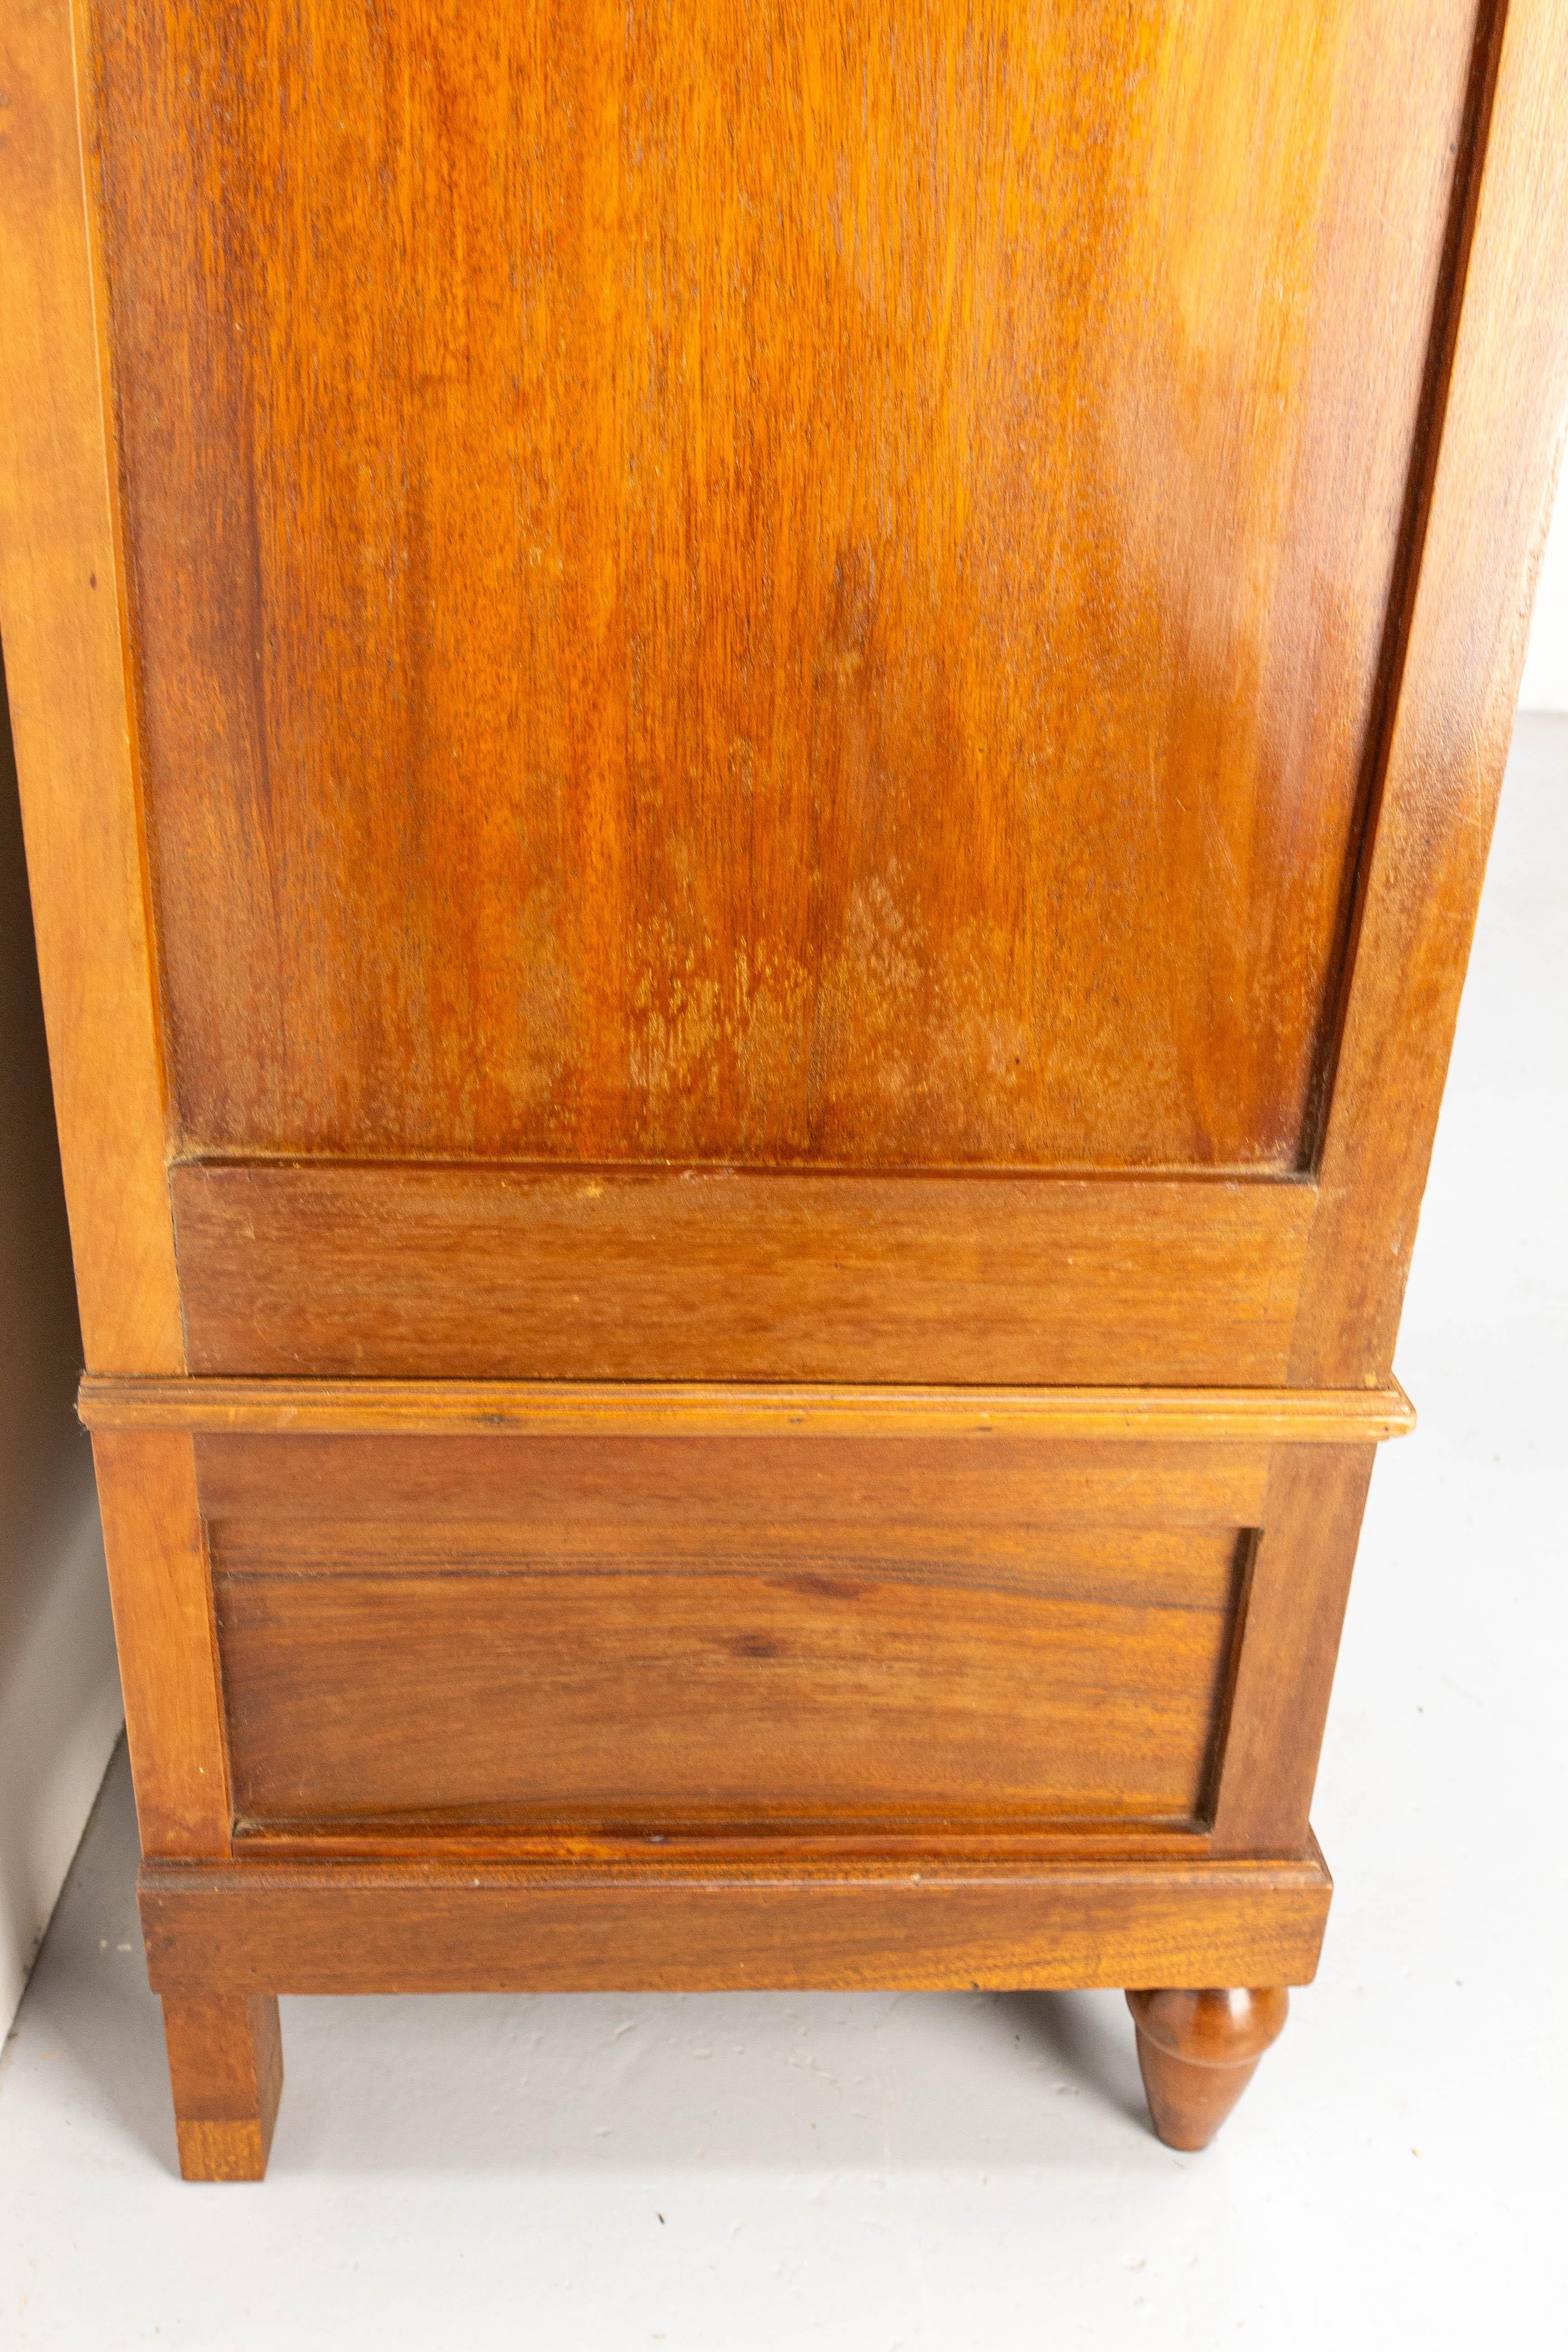 French Iroko Armoire with Beveled Mirrors in the Louis 16 Revival Style, 1900 For Sale 9